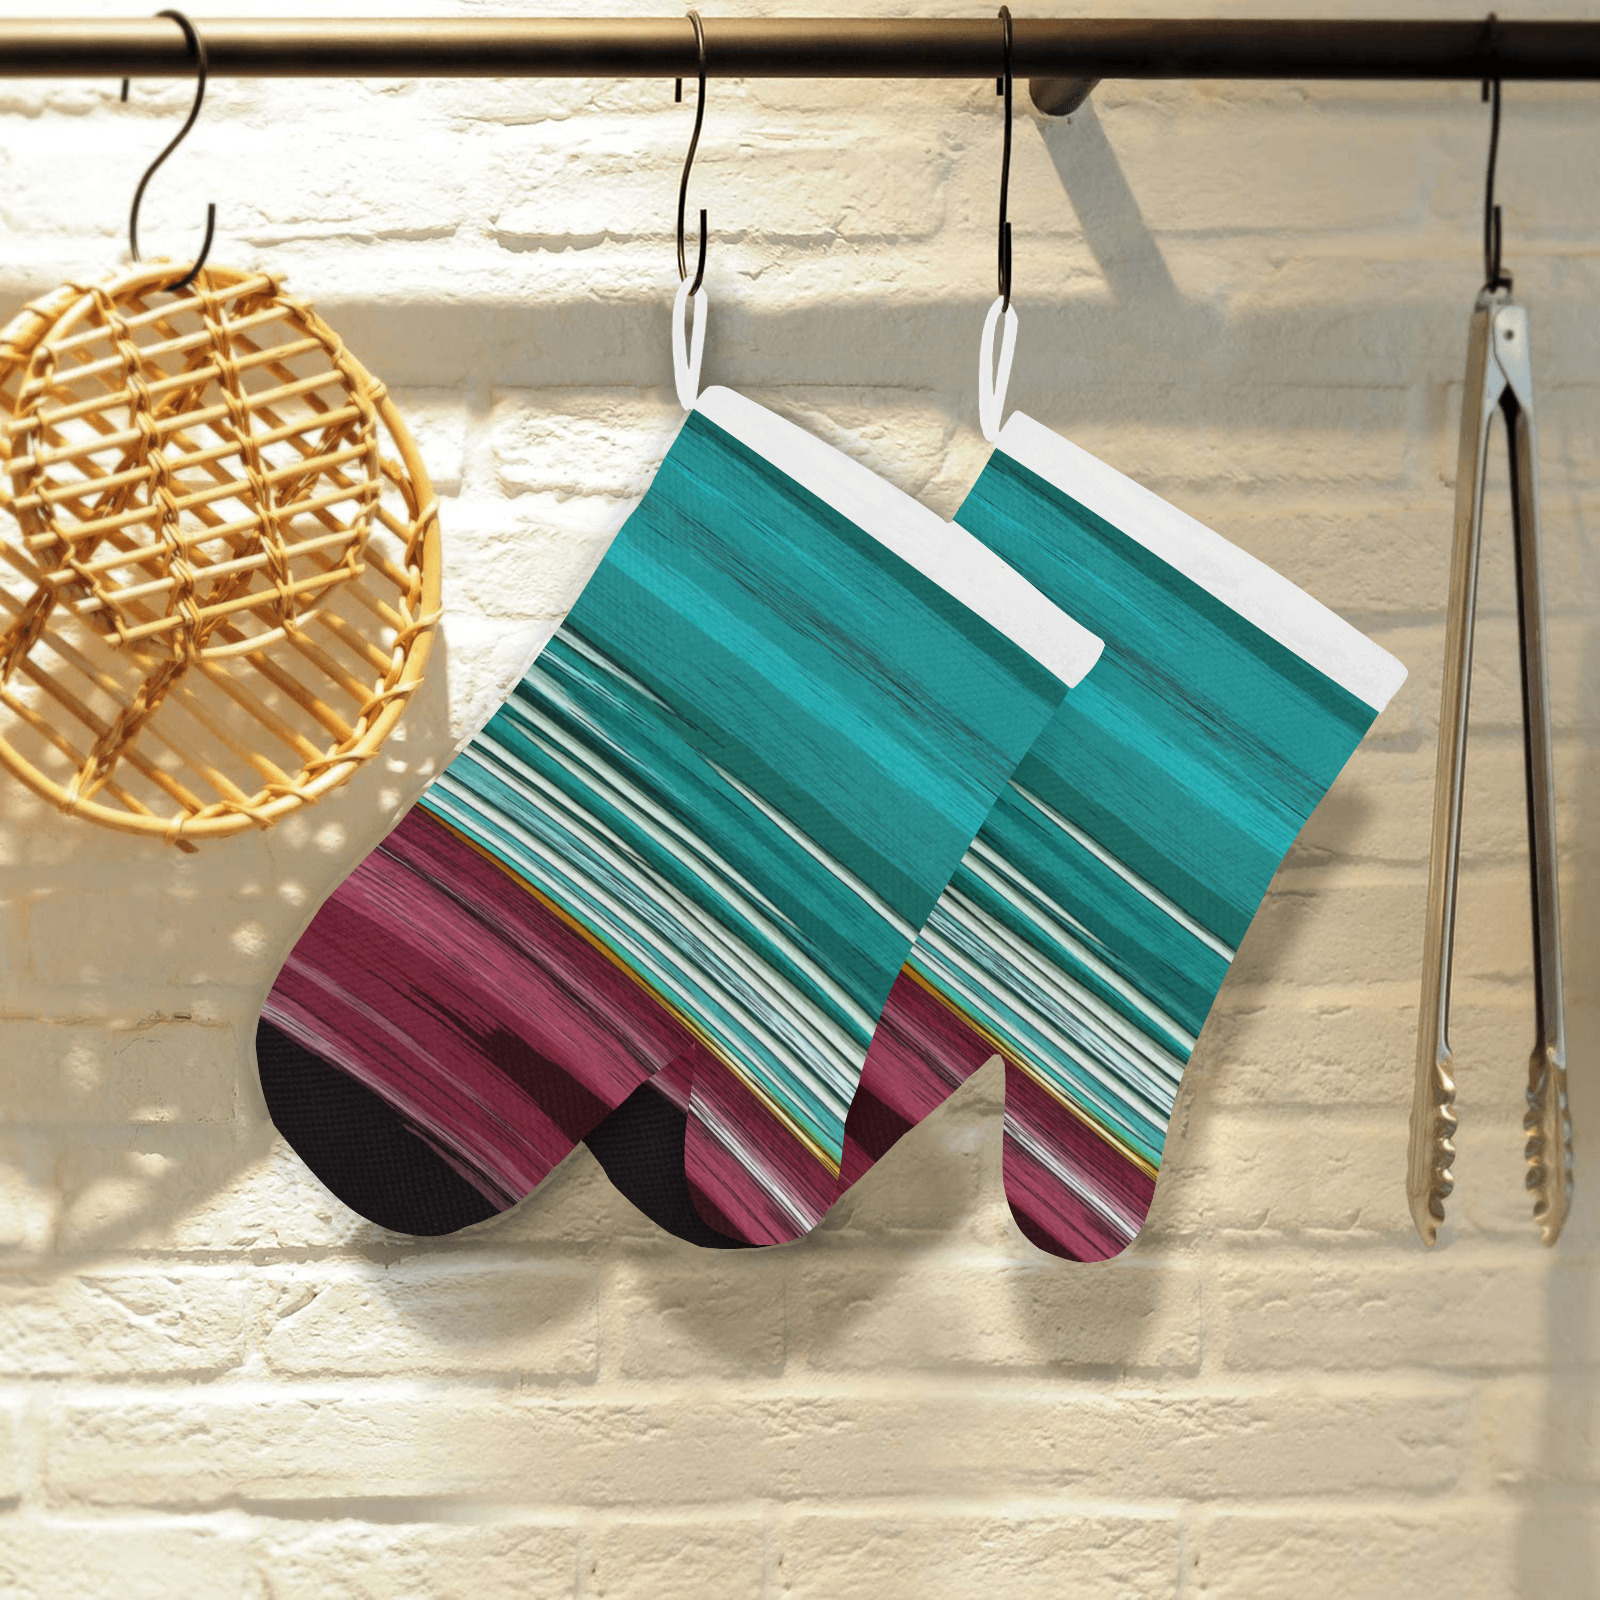 Abstract Red And Turquoise Horizontal Stripes Linen Oven Mitt (Two Pieces)